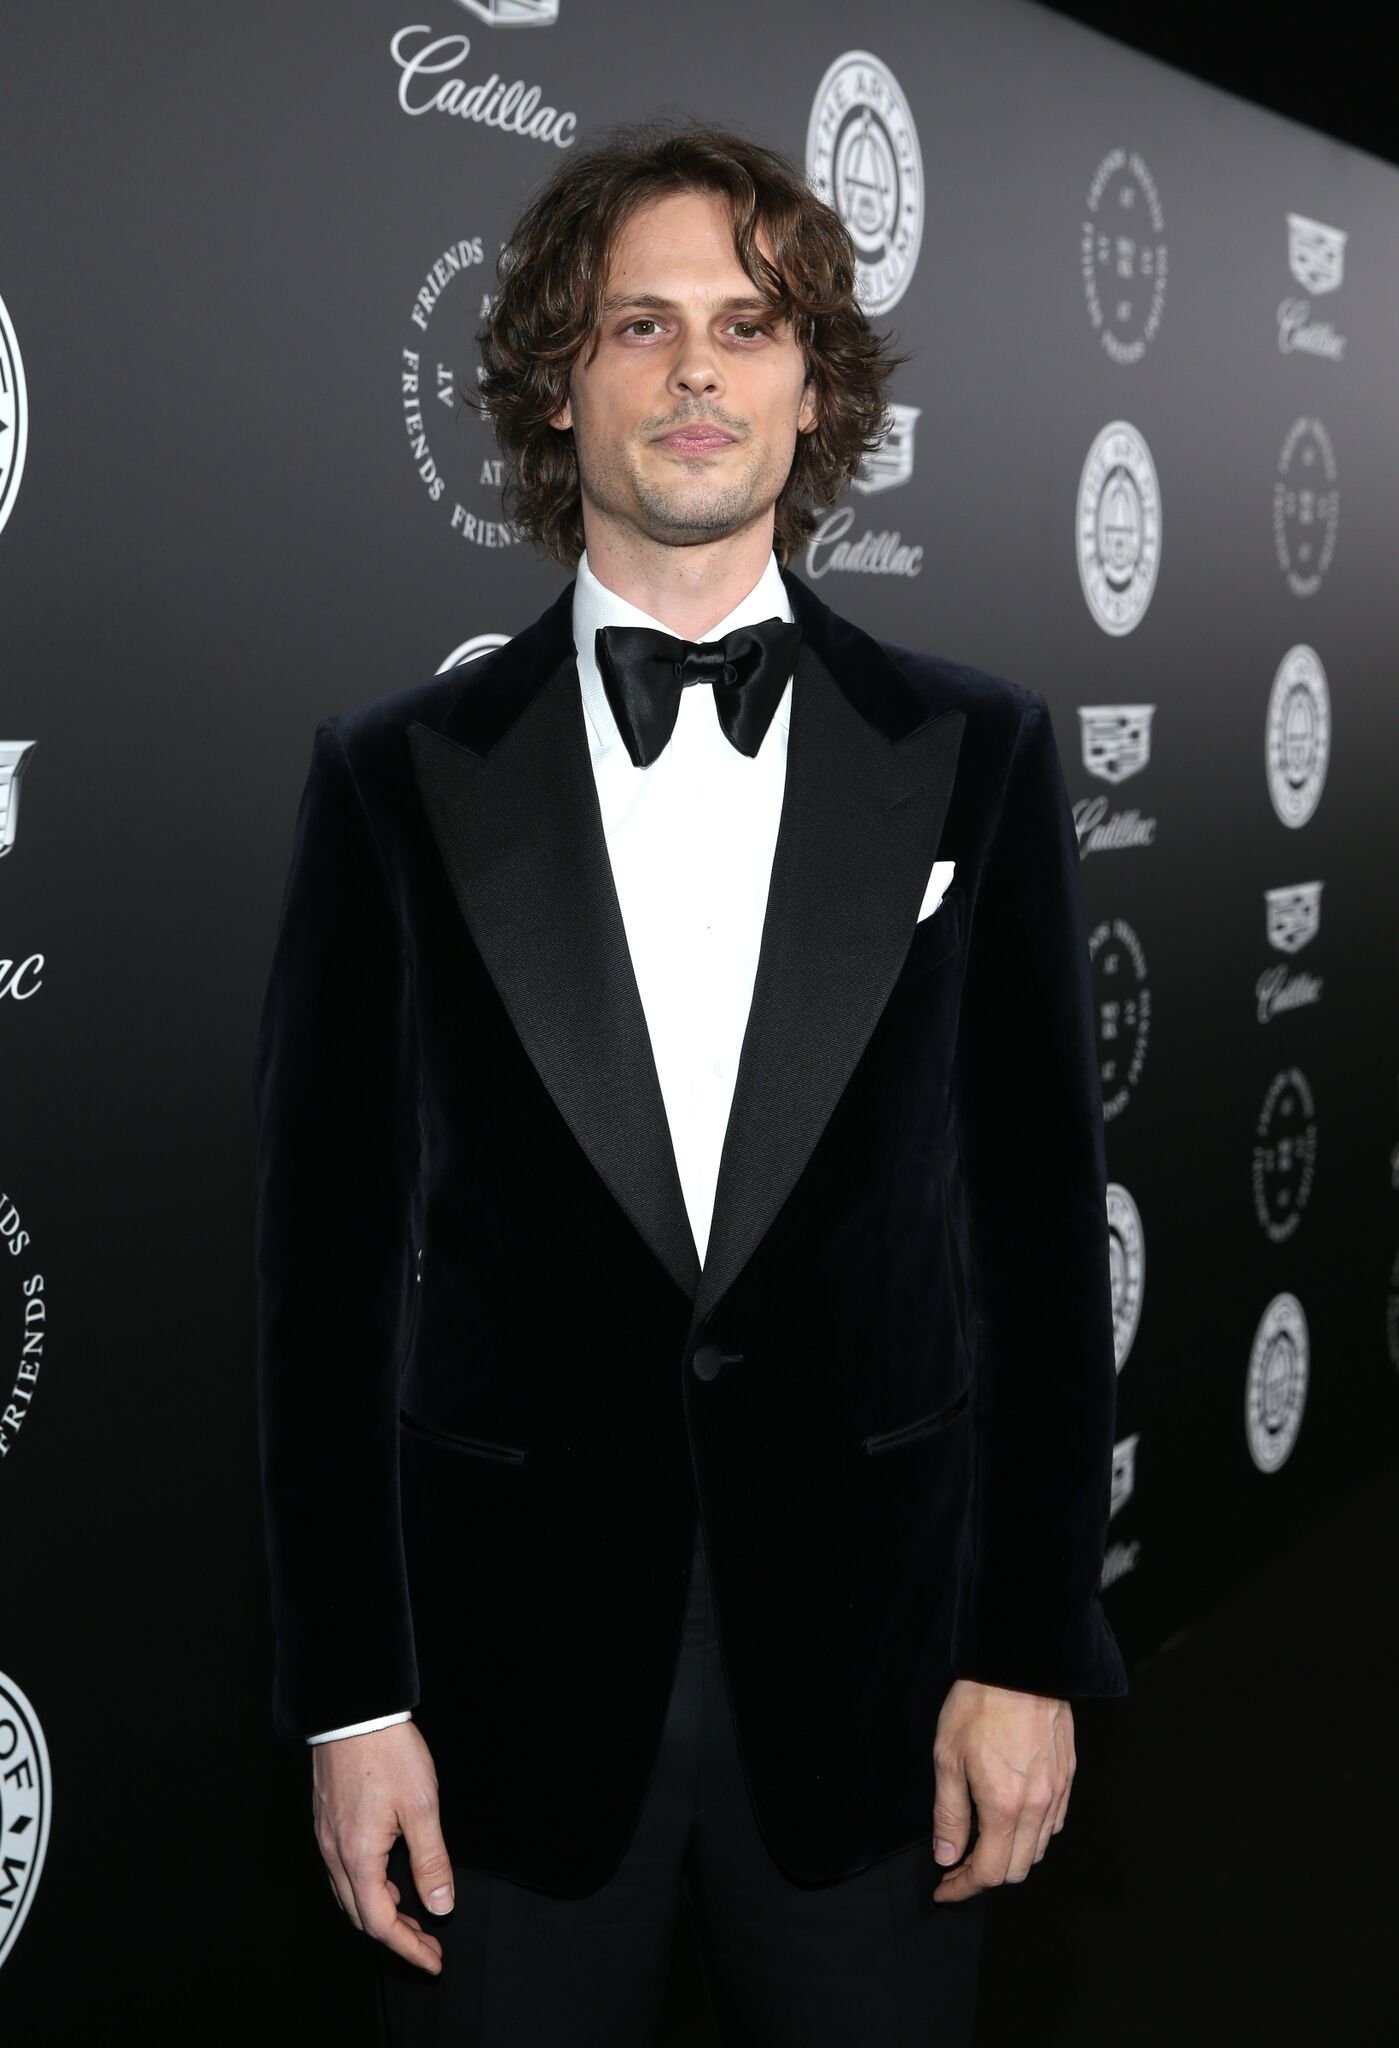  Matthew Gray Gubler attends The Art Of Elysium's 11th Annual Celebration with John Legend at Barker Hangar on January 6, 2018 in Santa Monica, California | Photo: Getty Images